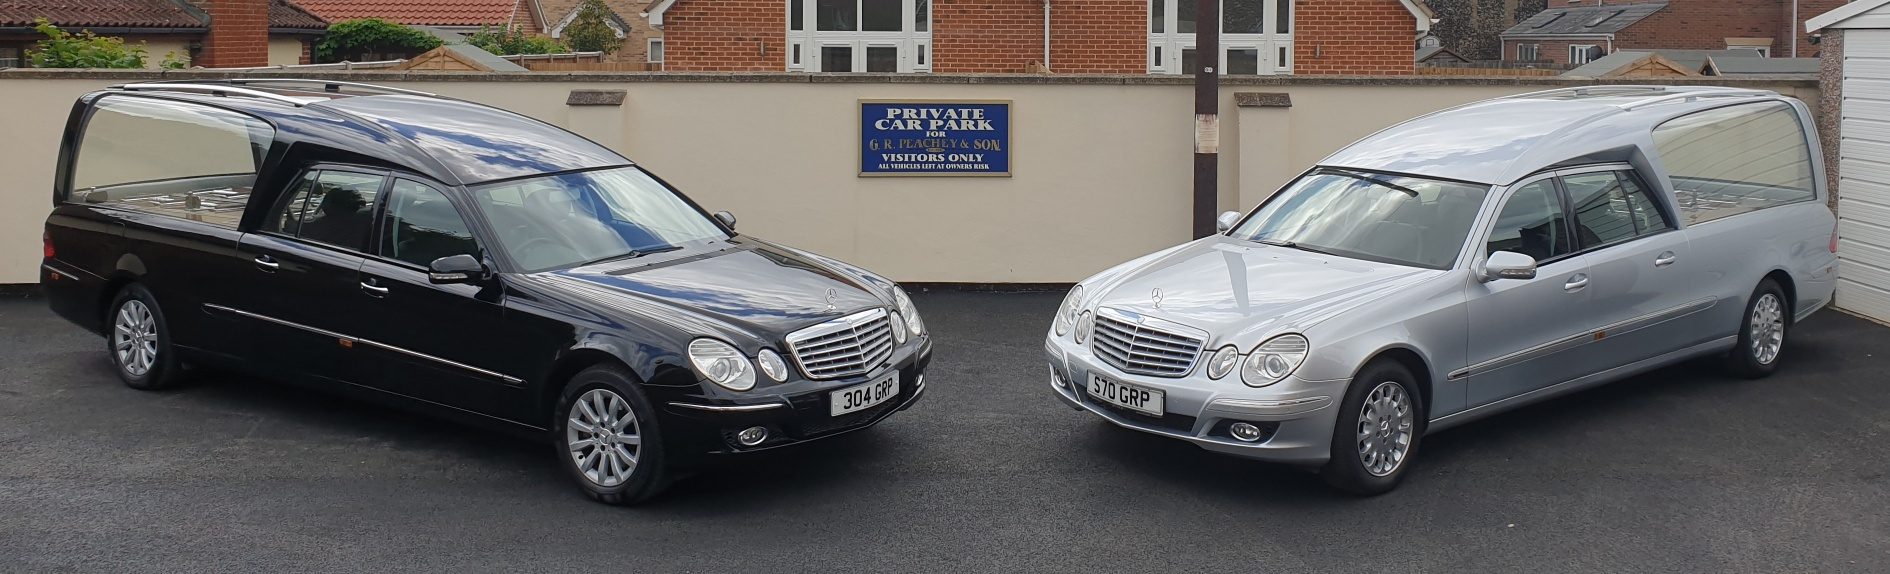 Black and silver hearses at our premises